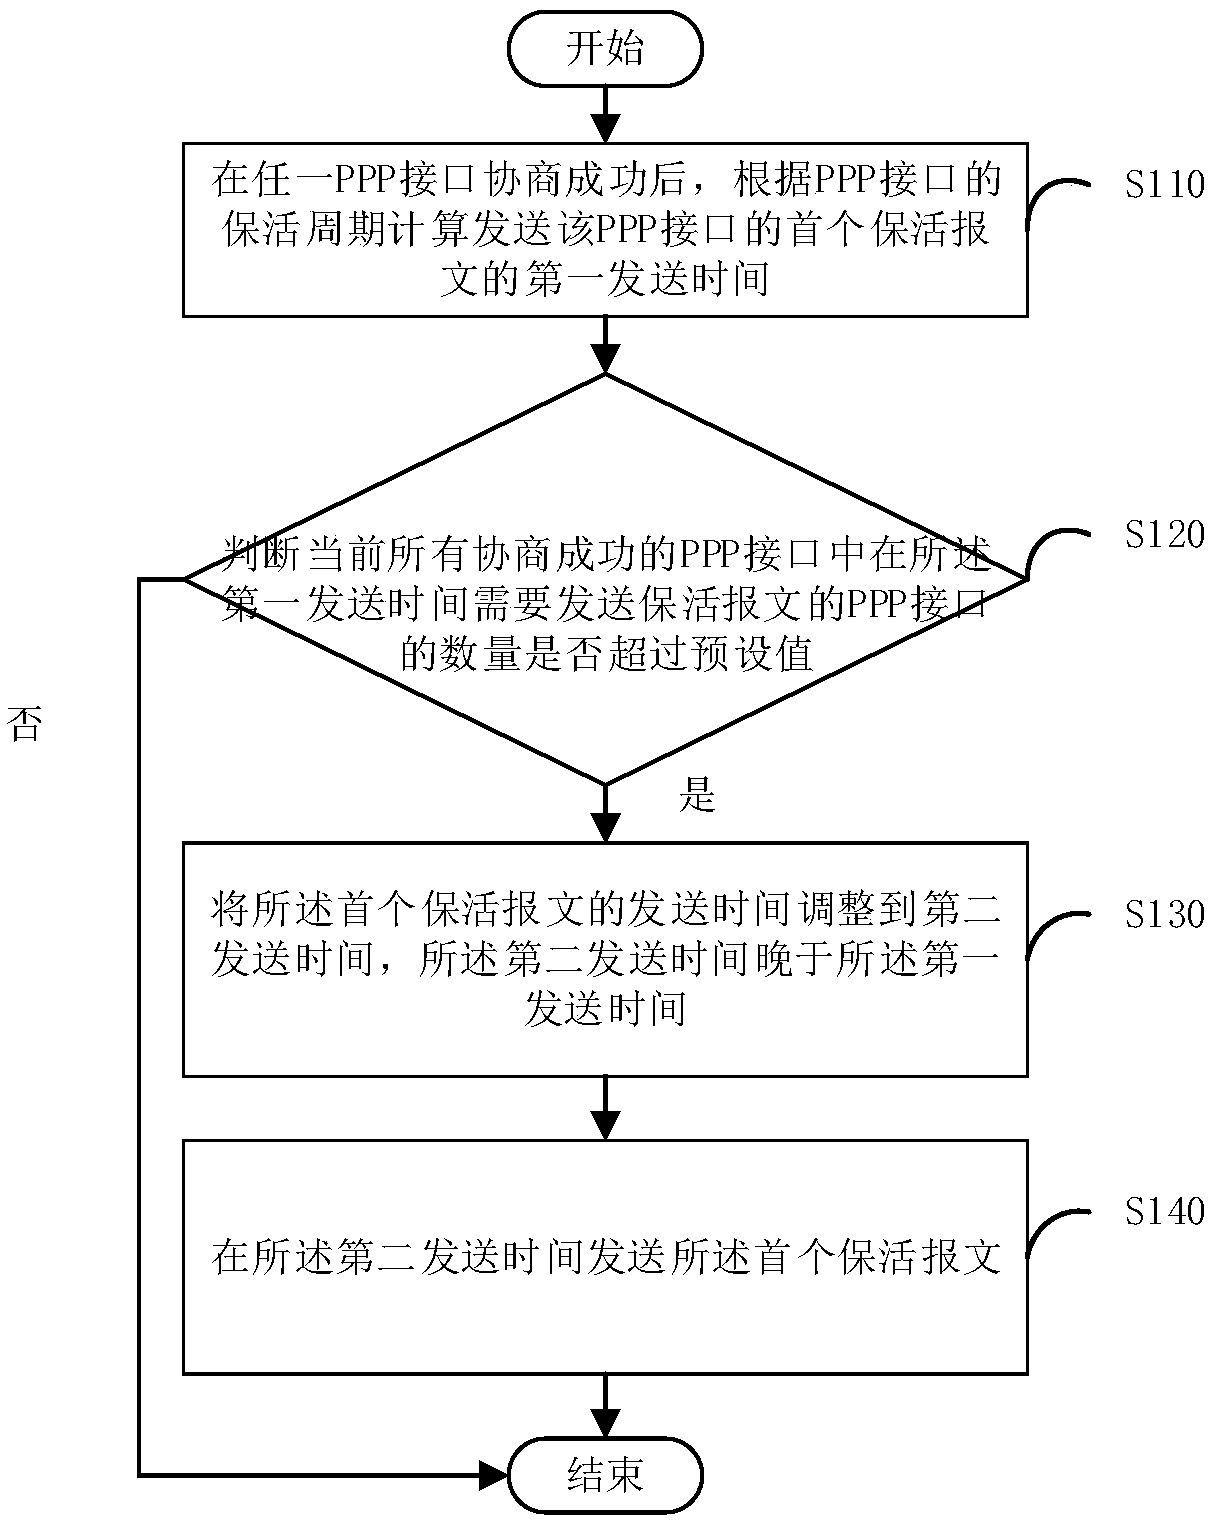 Keep-alive message sending method and device, electronic equipment and readable storage medium